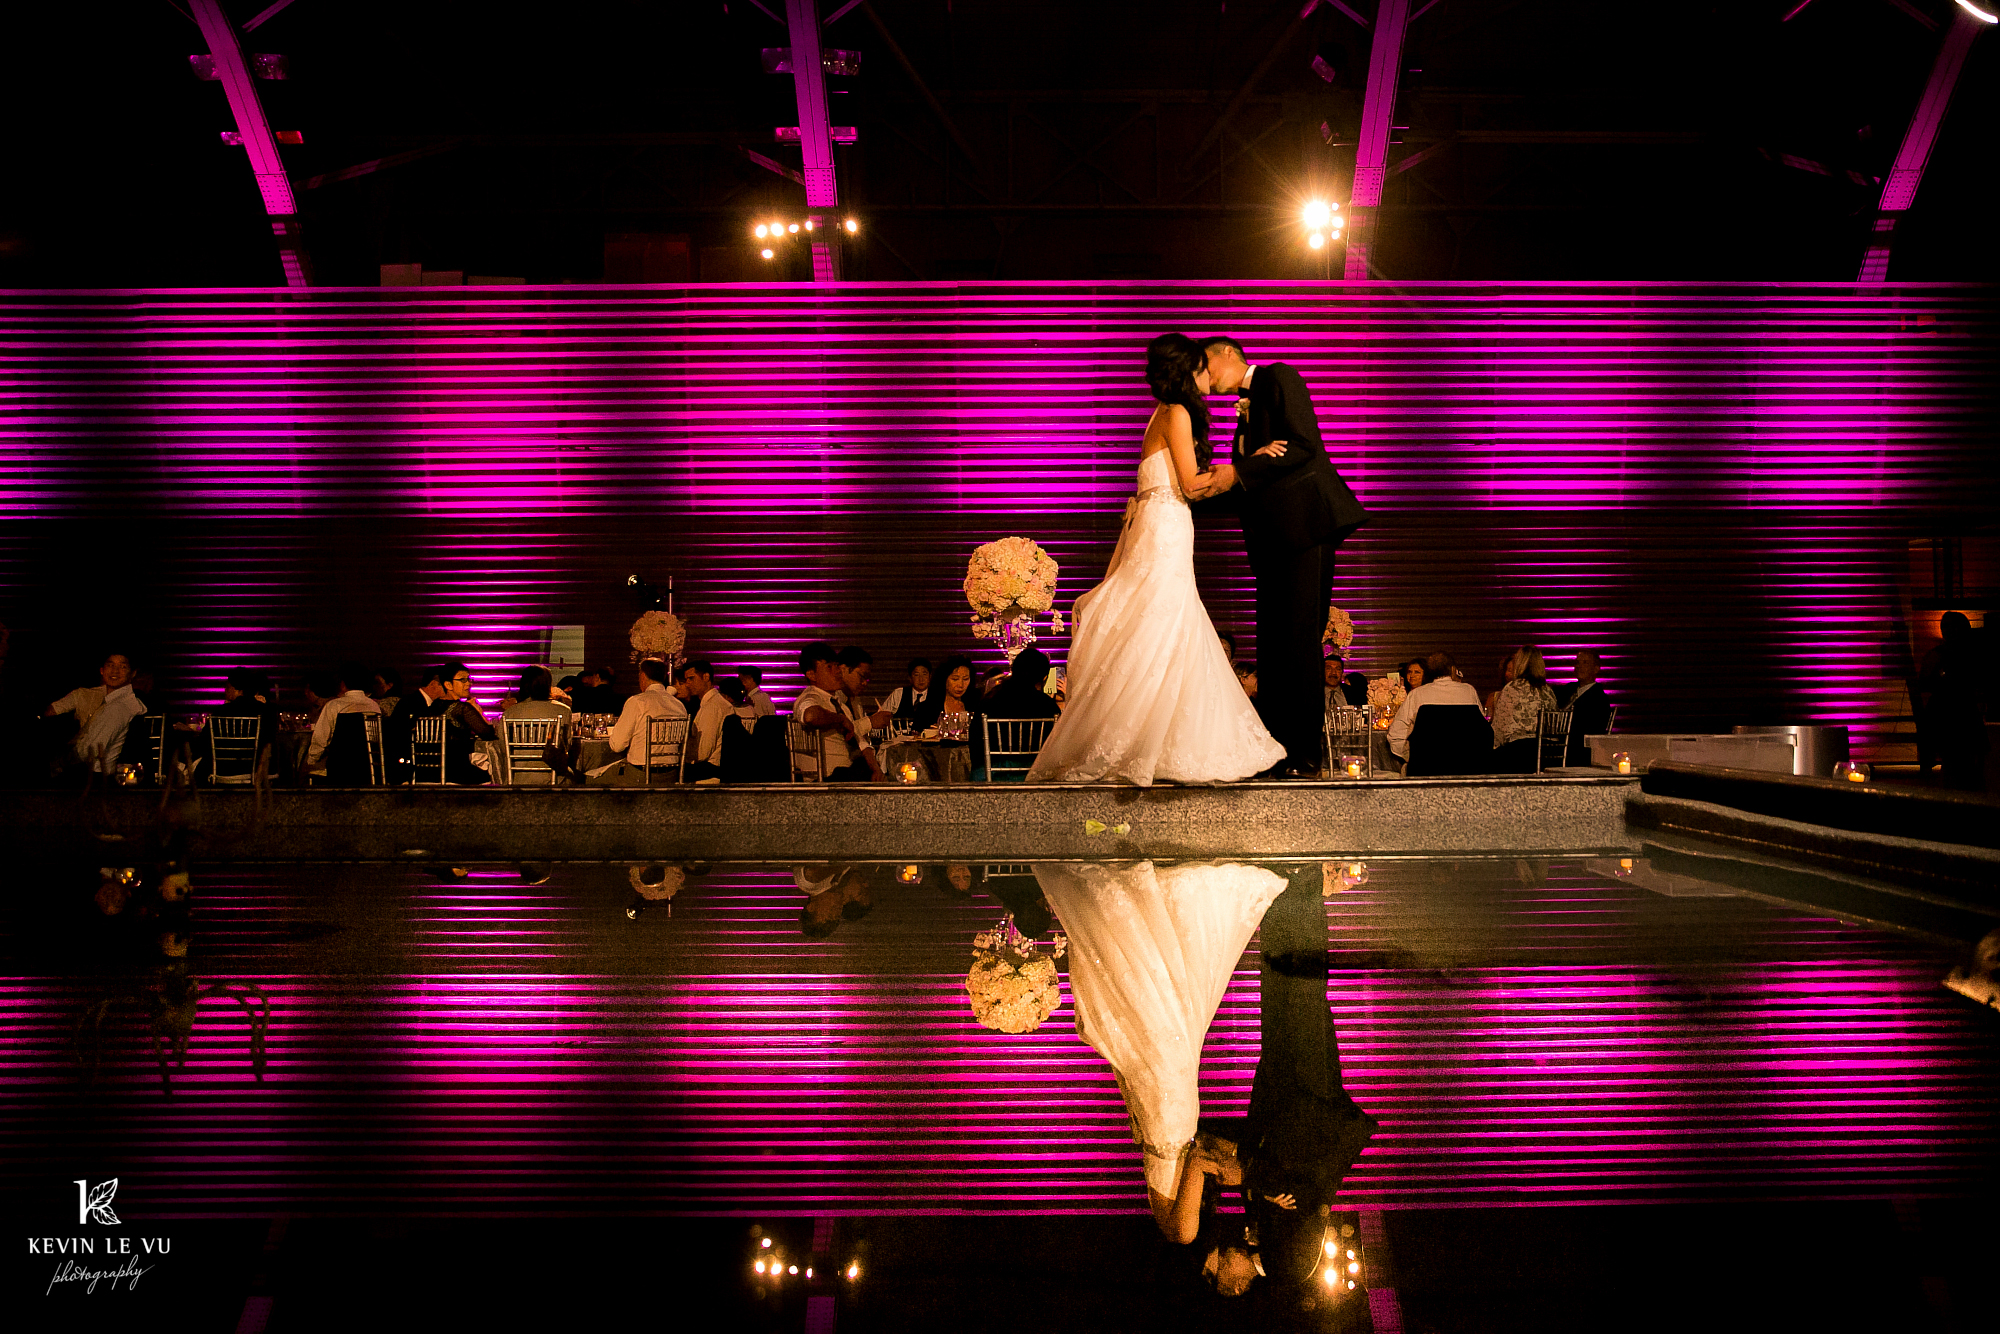 A bride and groom kiss at dusk in front of wedding guests seated at dining rounds and corrugated metal lit in purple. Bride and groom image are reflected in nearby fountain water